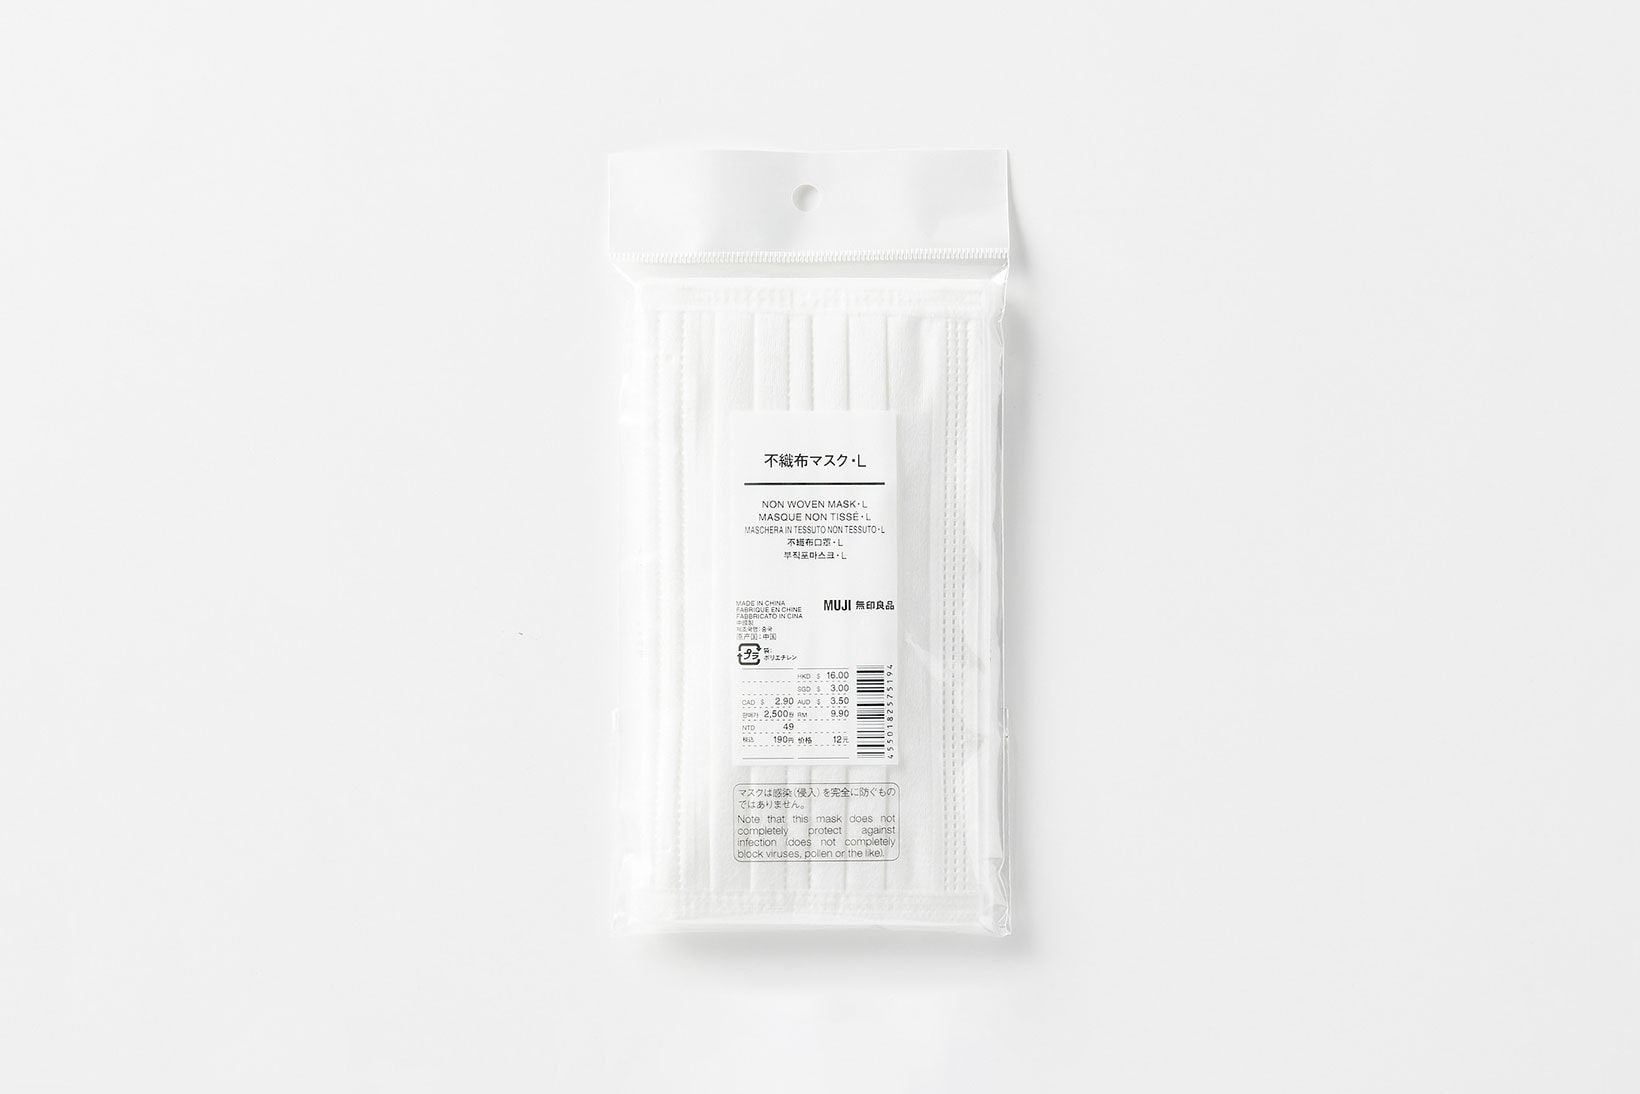 MUJI Reusable Face Masks Release Info Buy Price Sustainable two pack where comfortable review